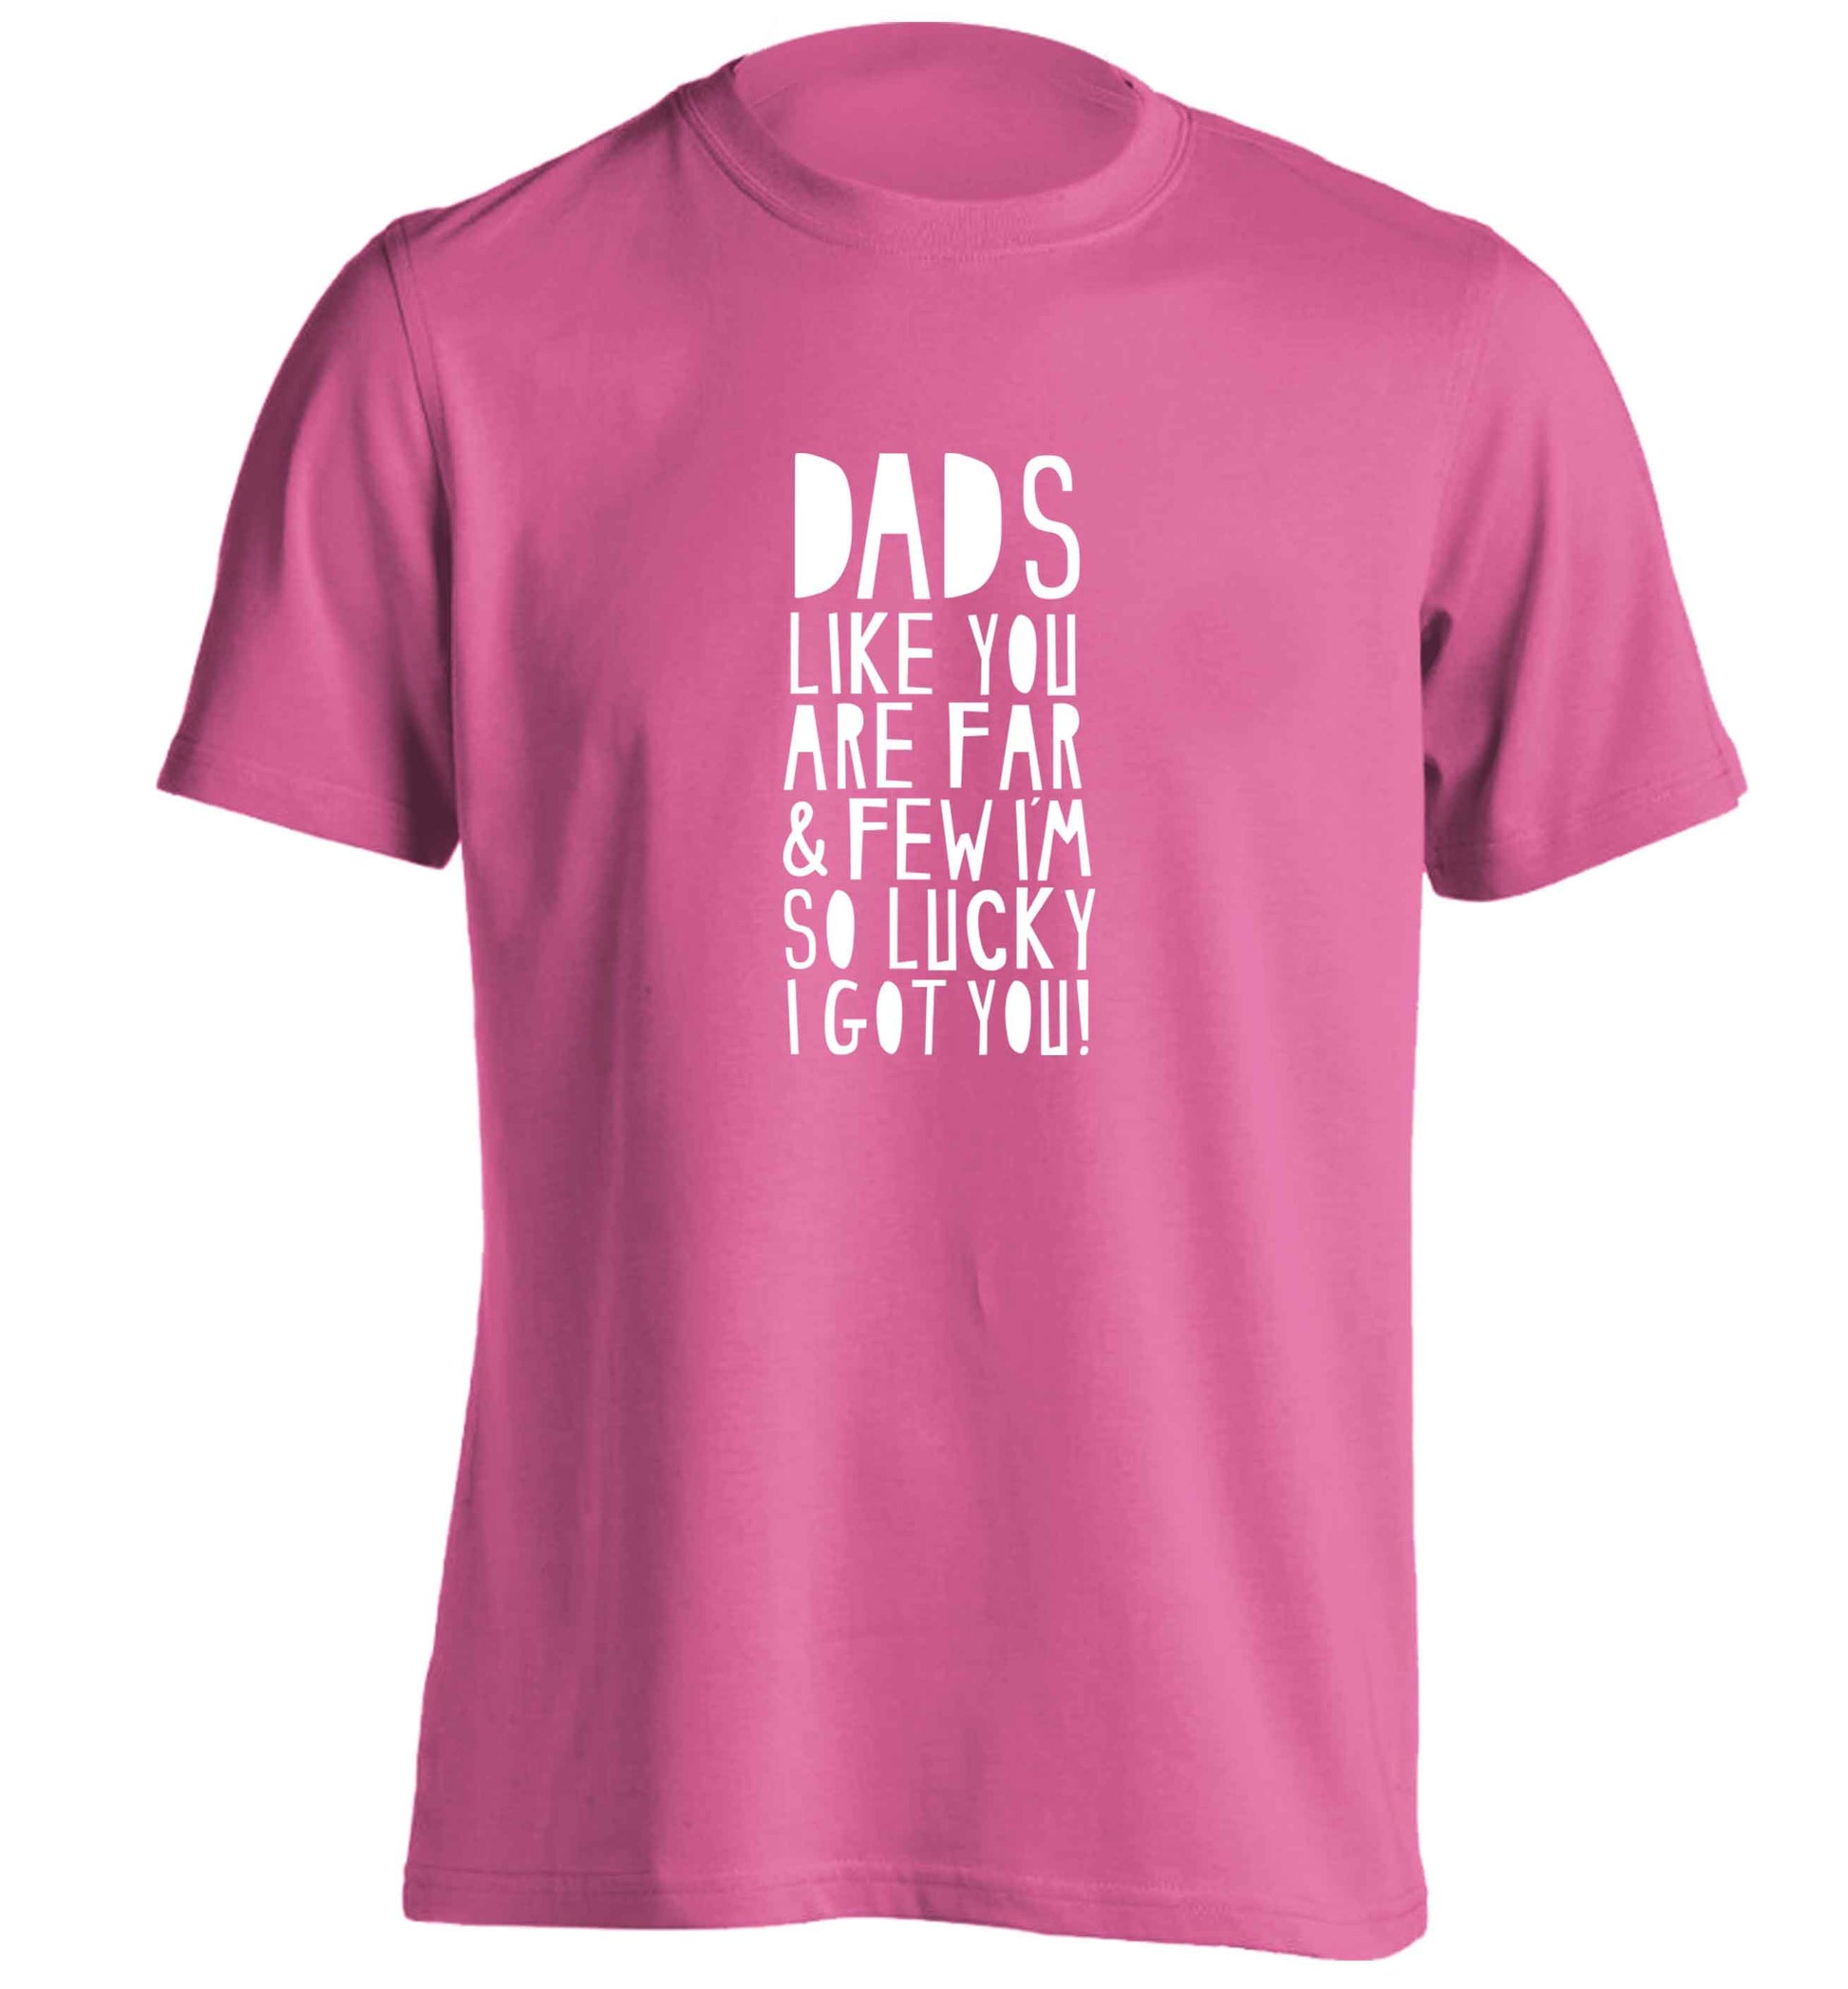 Dads like you are far and few I'm so luck I got you! adults unisex pink Tshirt 2XL